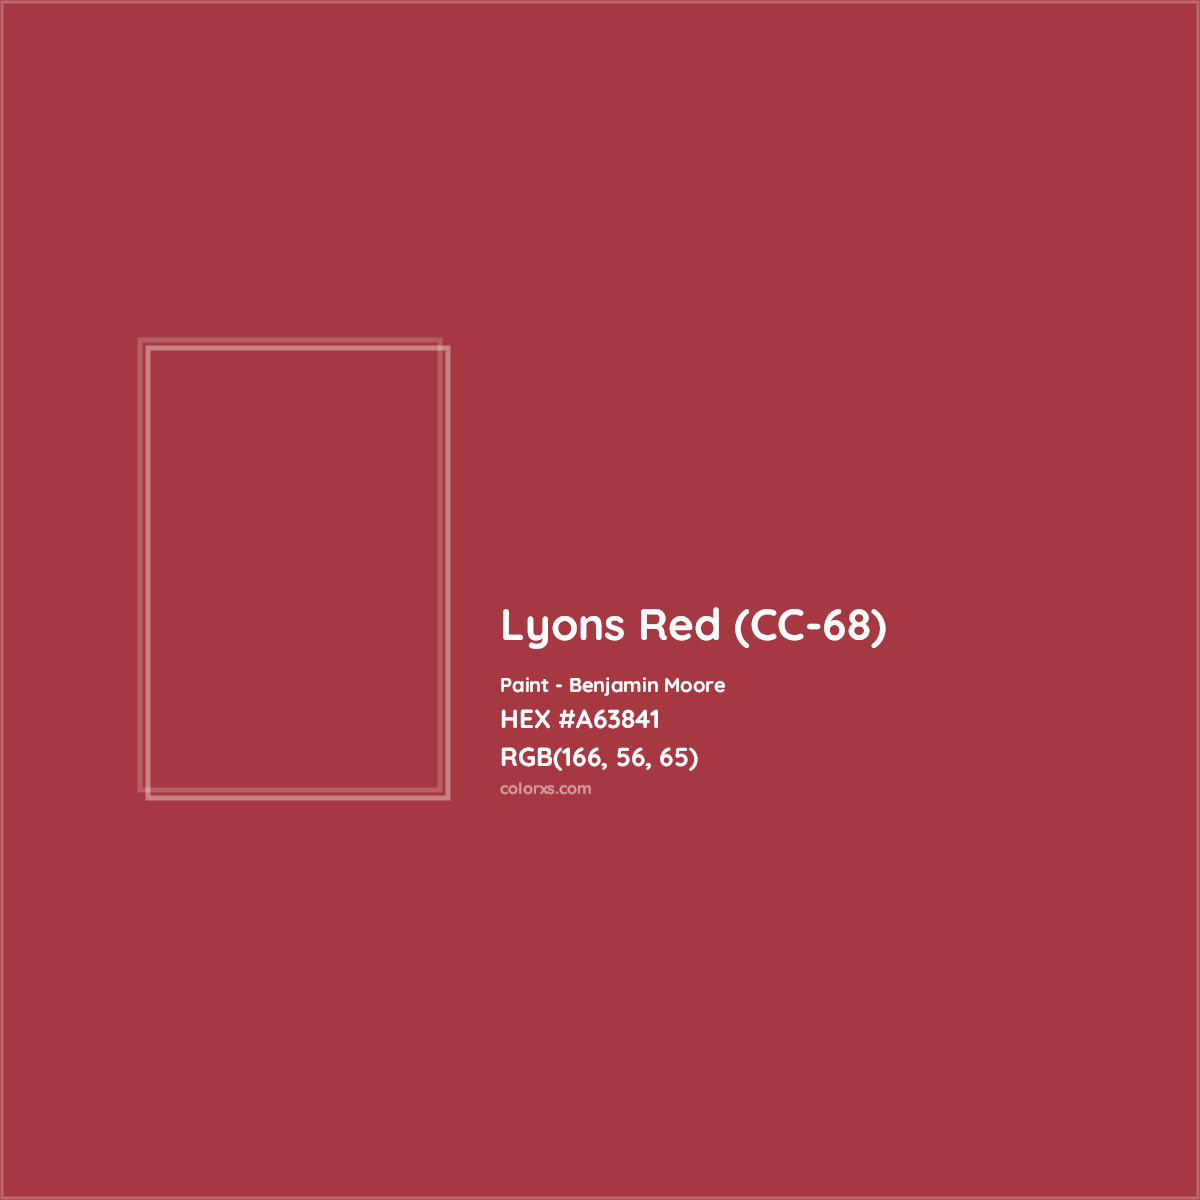 HEX #A63841 Lyons Red (CC-68) Paint Benjamin Moore - Color Code